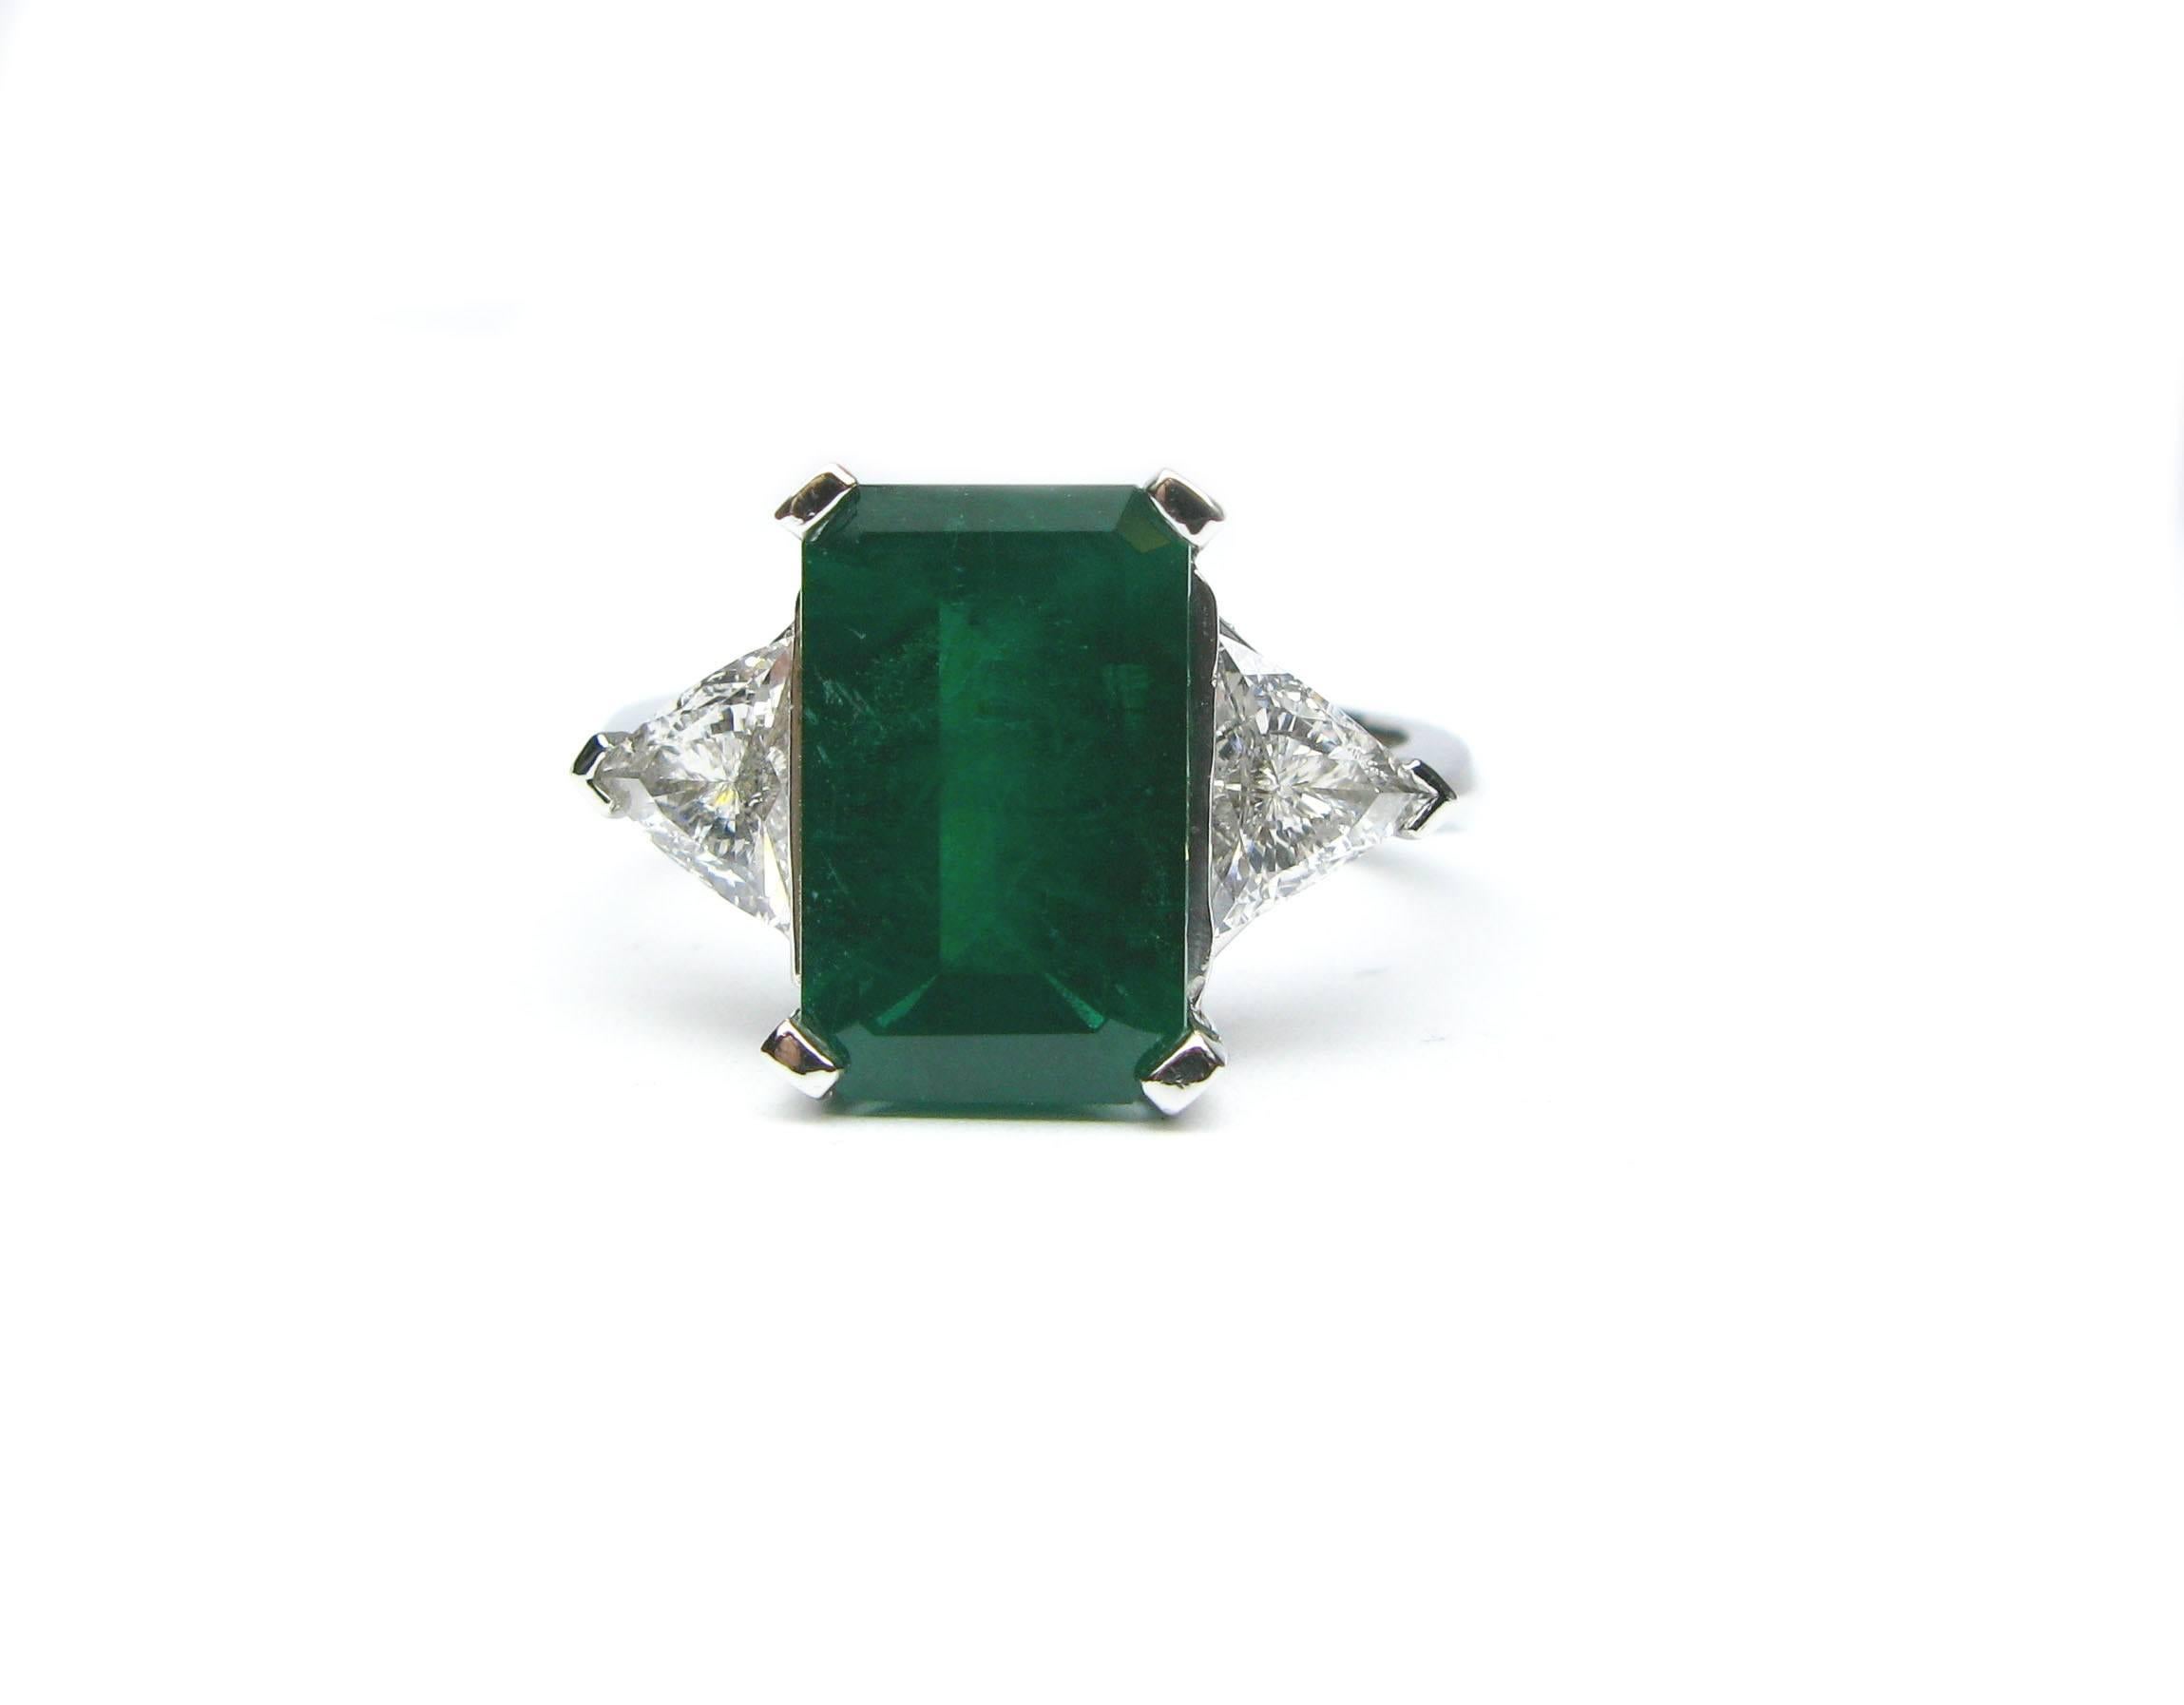 This stunning platinum ring features a gorgeous 3.98ct rectangular step cut emerald center stone. The rich green color of this gemstone pairs nicely with the 0.81ctw, G color, VS1 clarity, trillion diamond sidestones and the 0.20ctw pave diamond